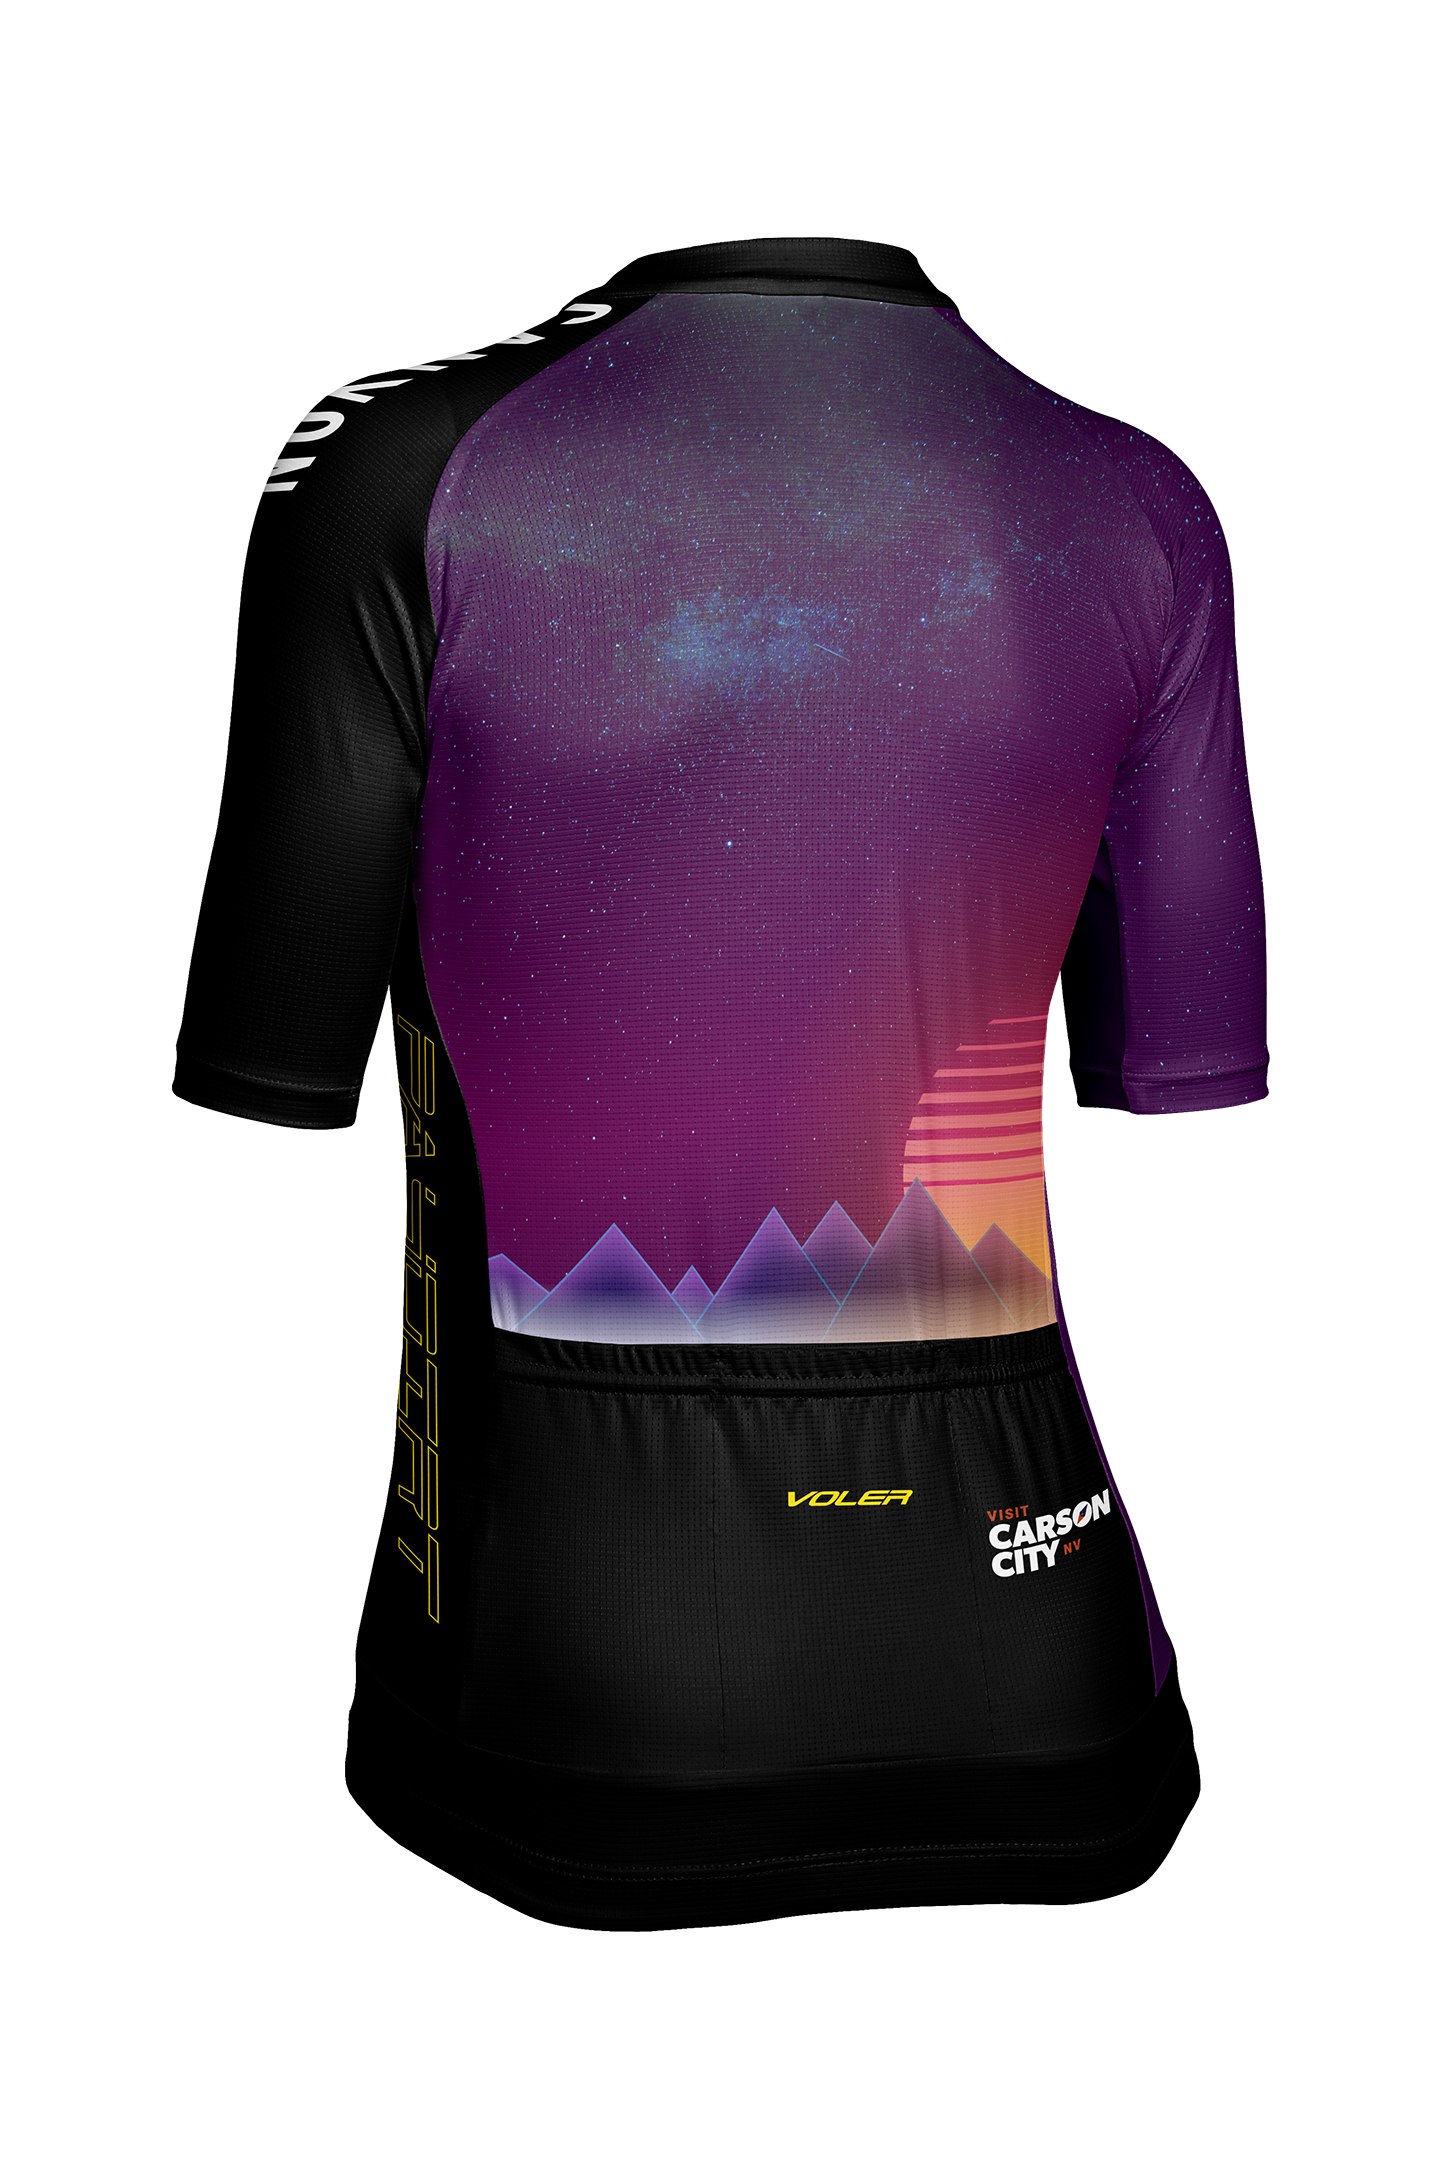 Paydirt's Velocity Air Women's Jersey by Voler